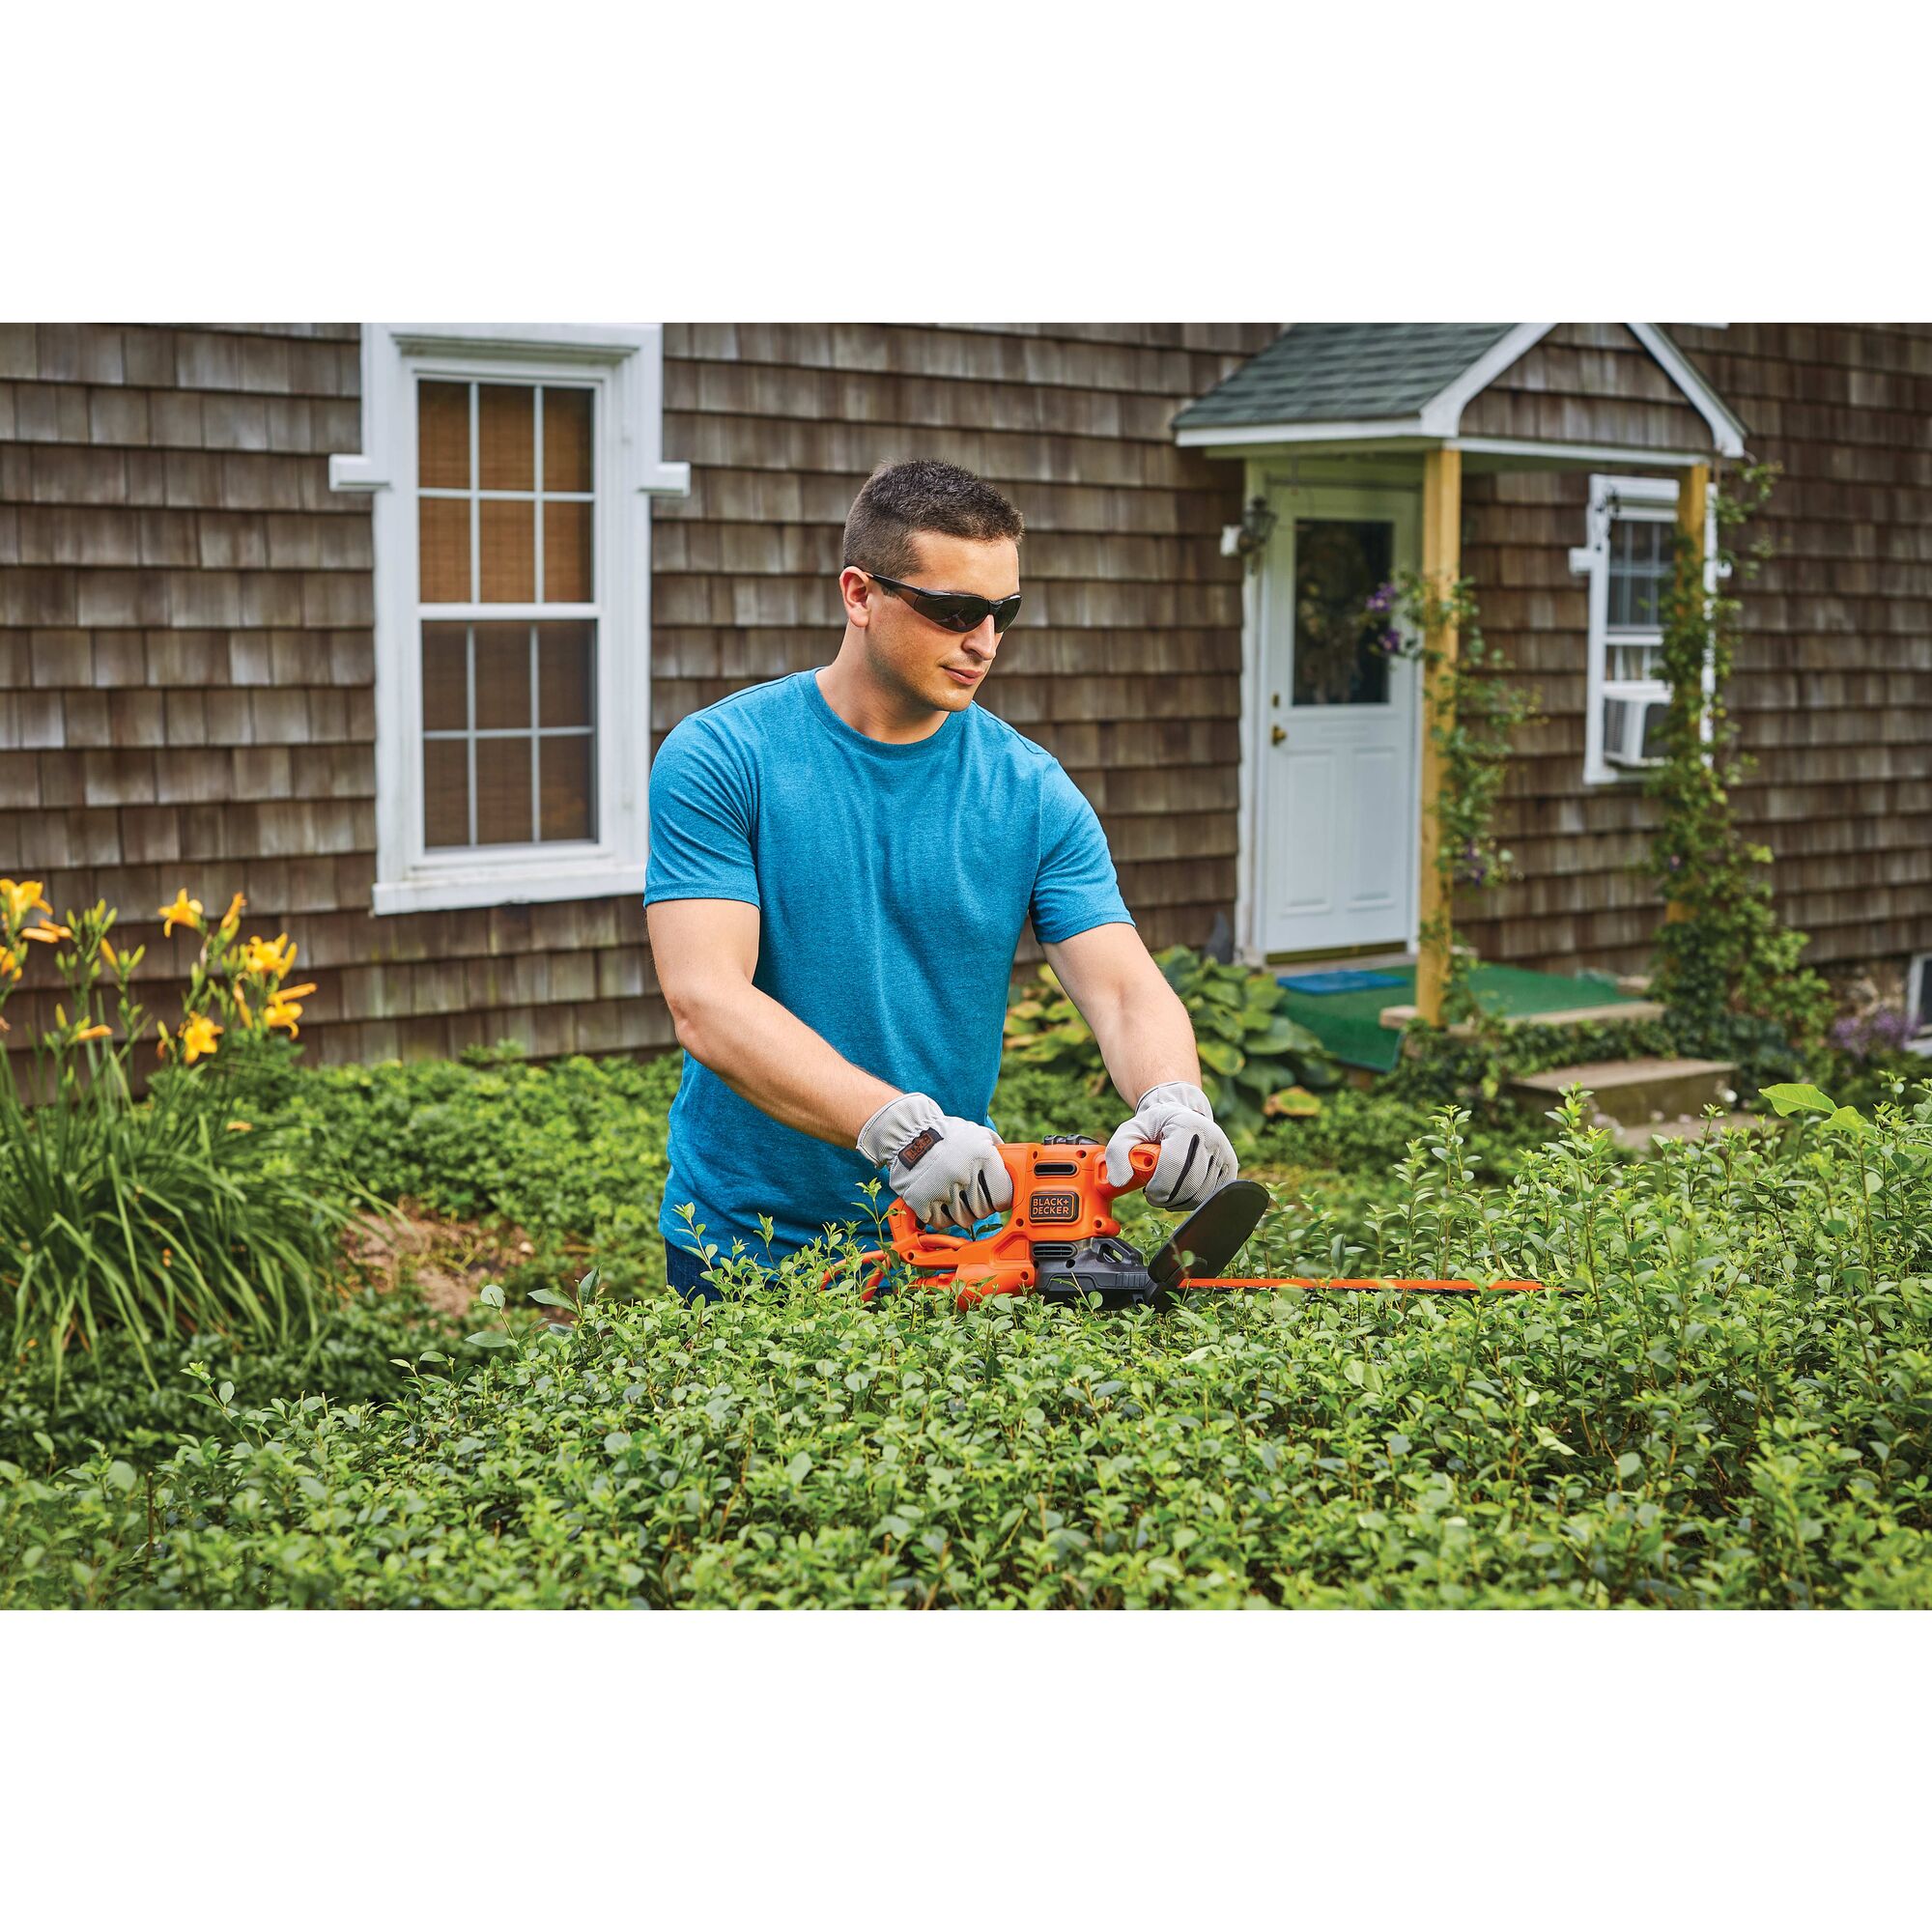 16 inch electric hedge trimmer being used by a person to trim hedge.